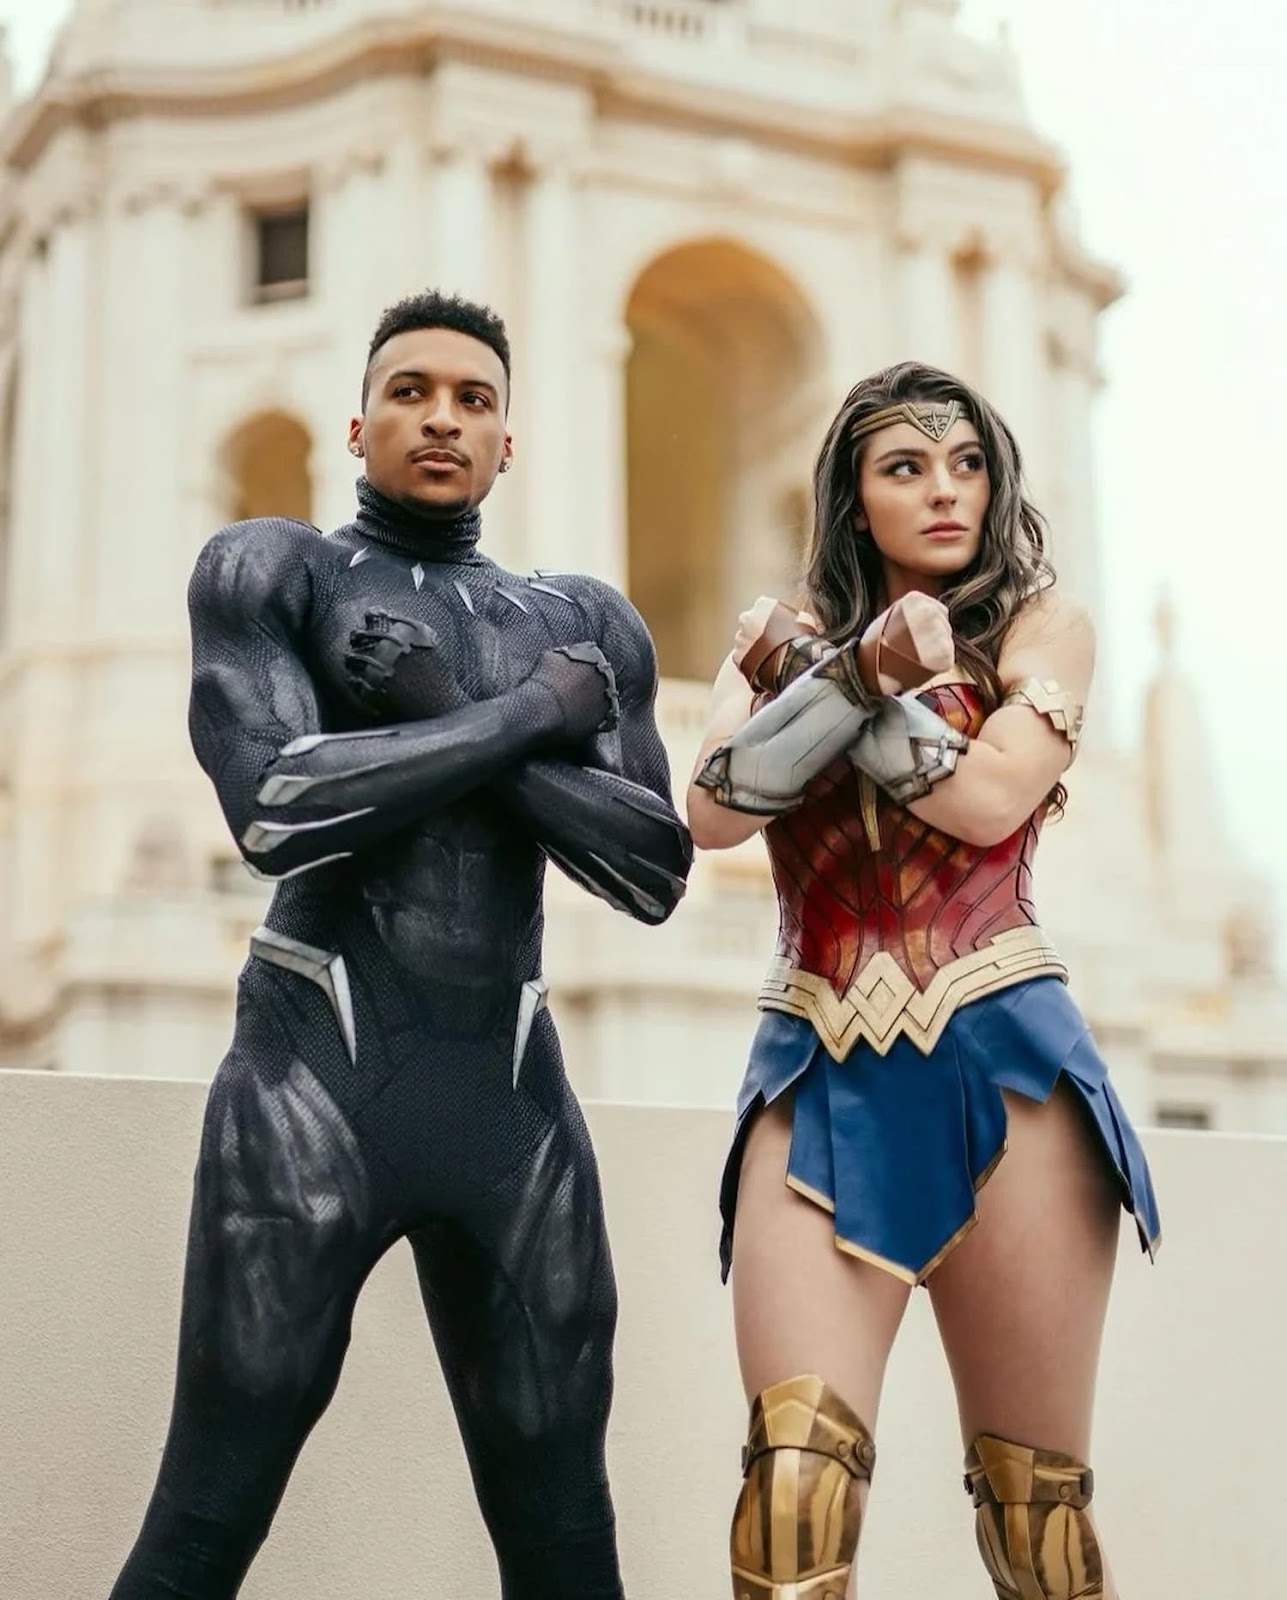 Wonder Woman and Black Panther Cosplay by Taya Miller and Tyreek